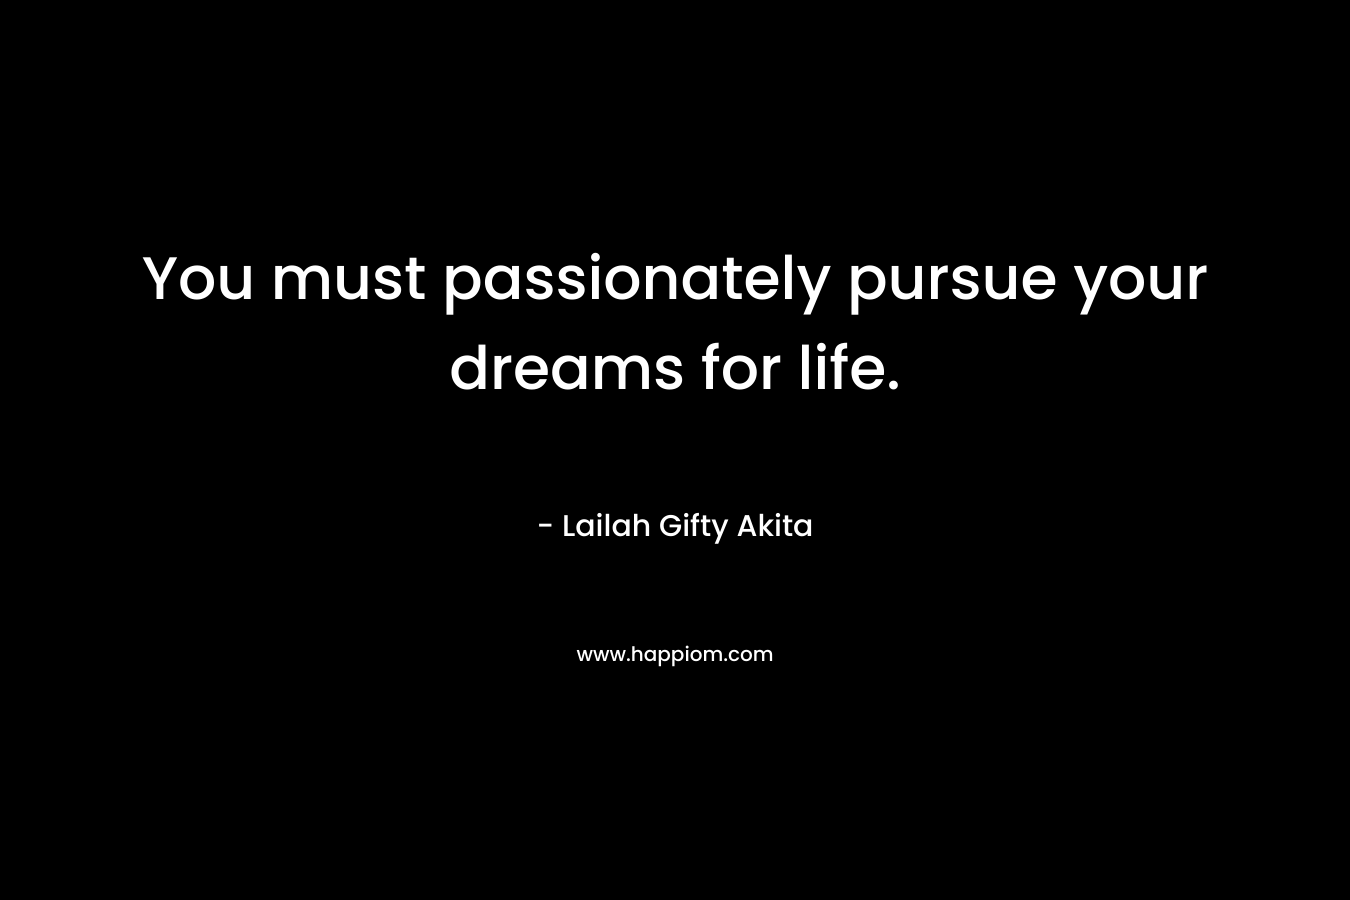 You must passionately pursue your dreams for life.